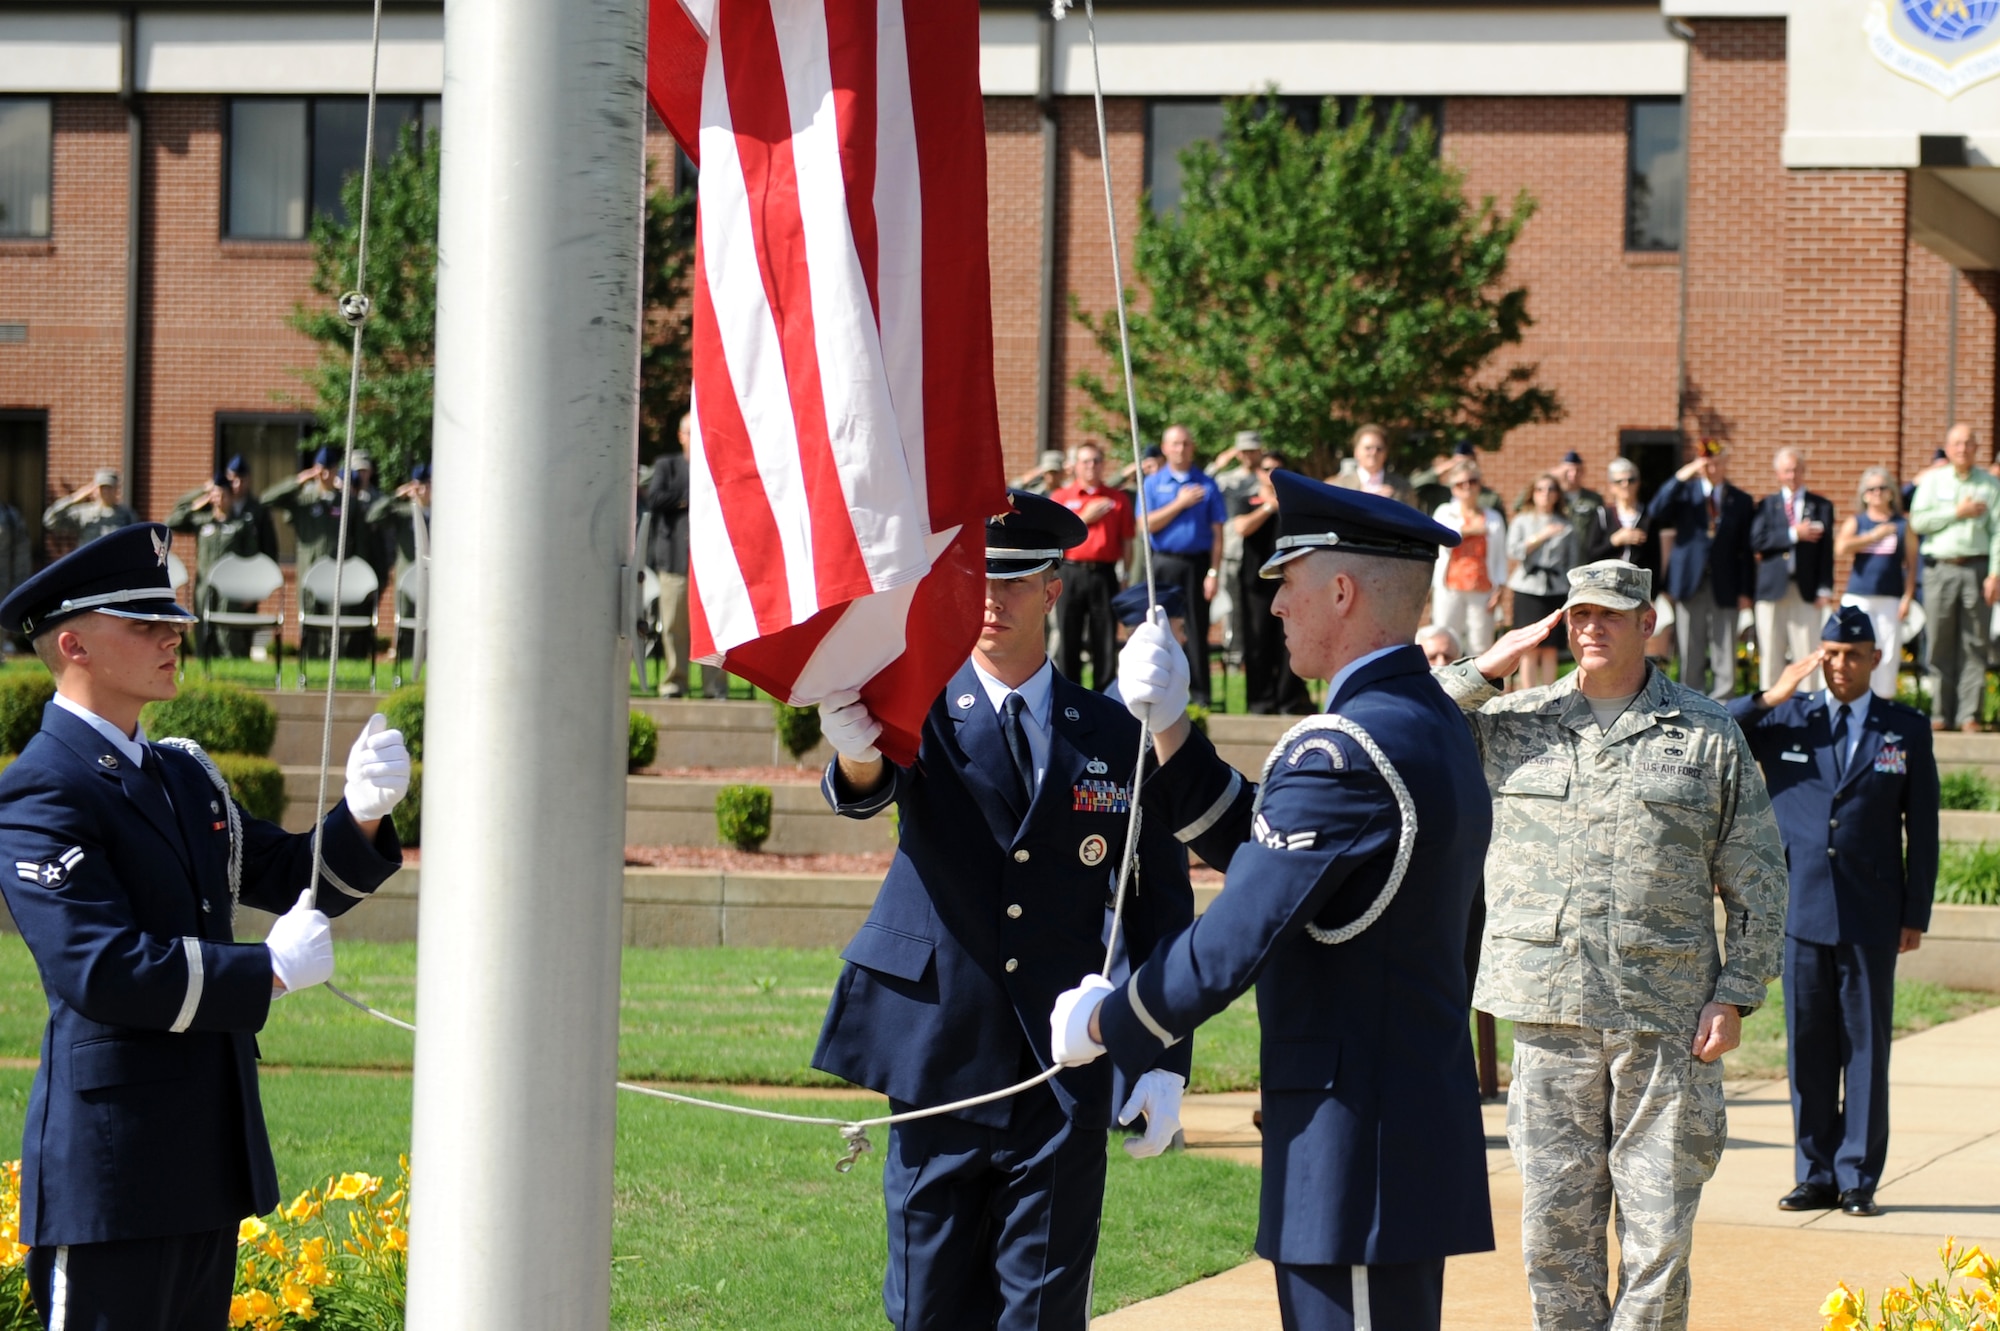 Base honor guardsmen retrieve the American Flag during the base's Memorial Day retreat ceremony May 23, 2013, at Little Rock Air Force Base, Ark. The Memorial Day Retreat Ceremony is just one of many events that the honor guard supports on base. (U.S. Air Force photo by Senior Airman Rusty Frank)